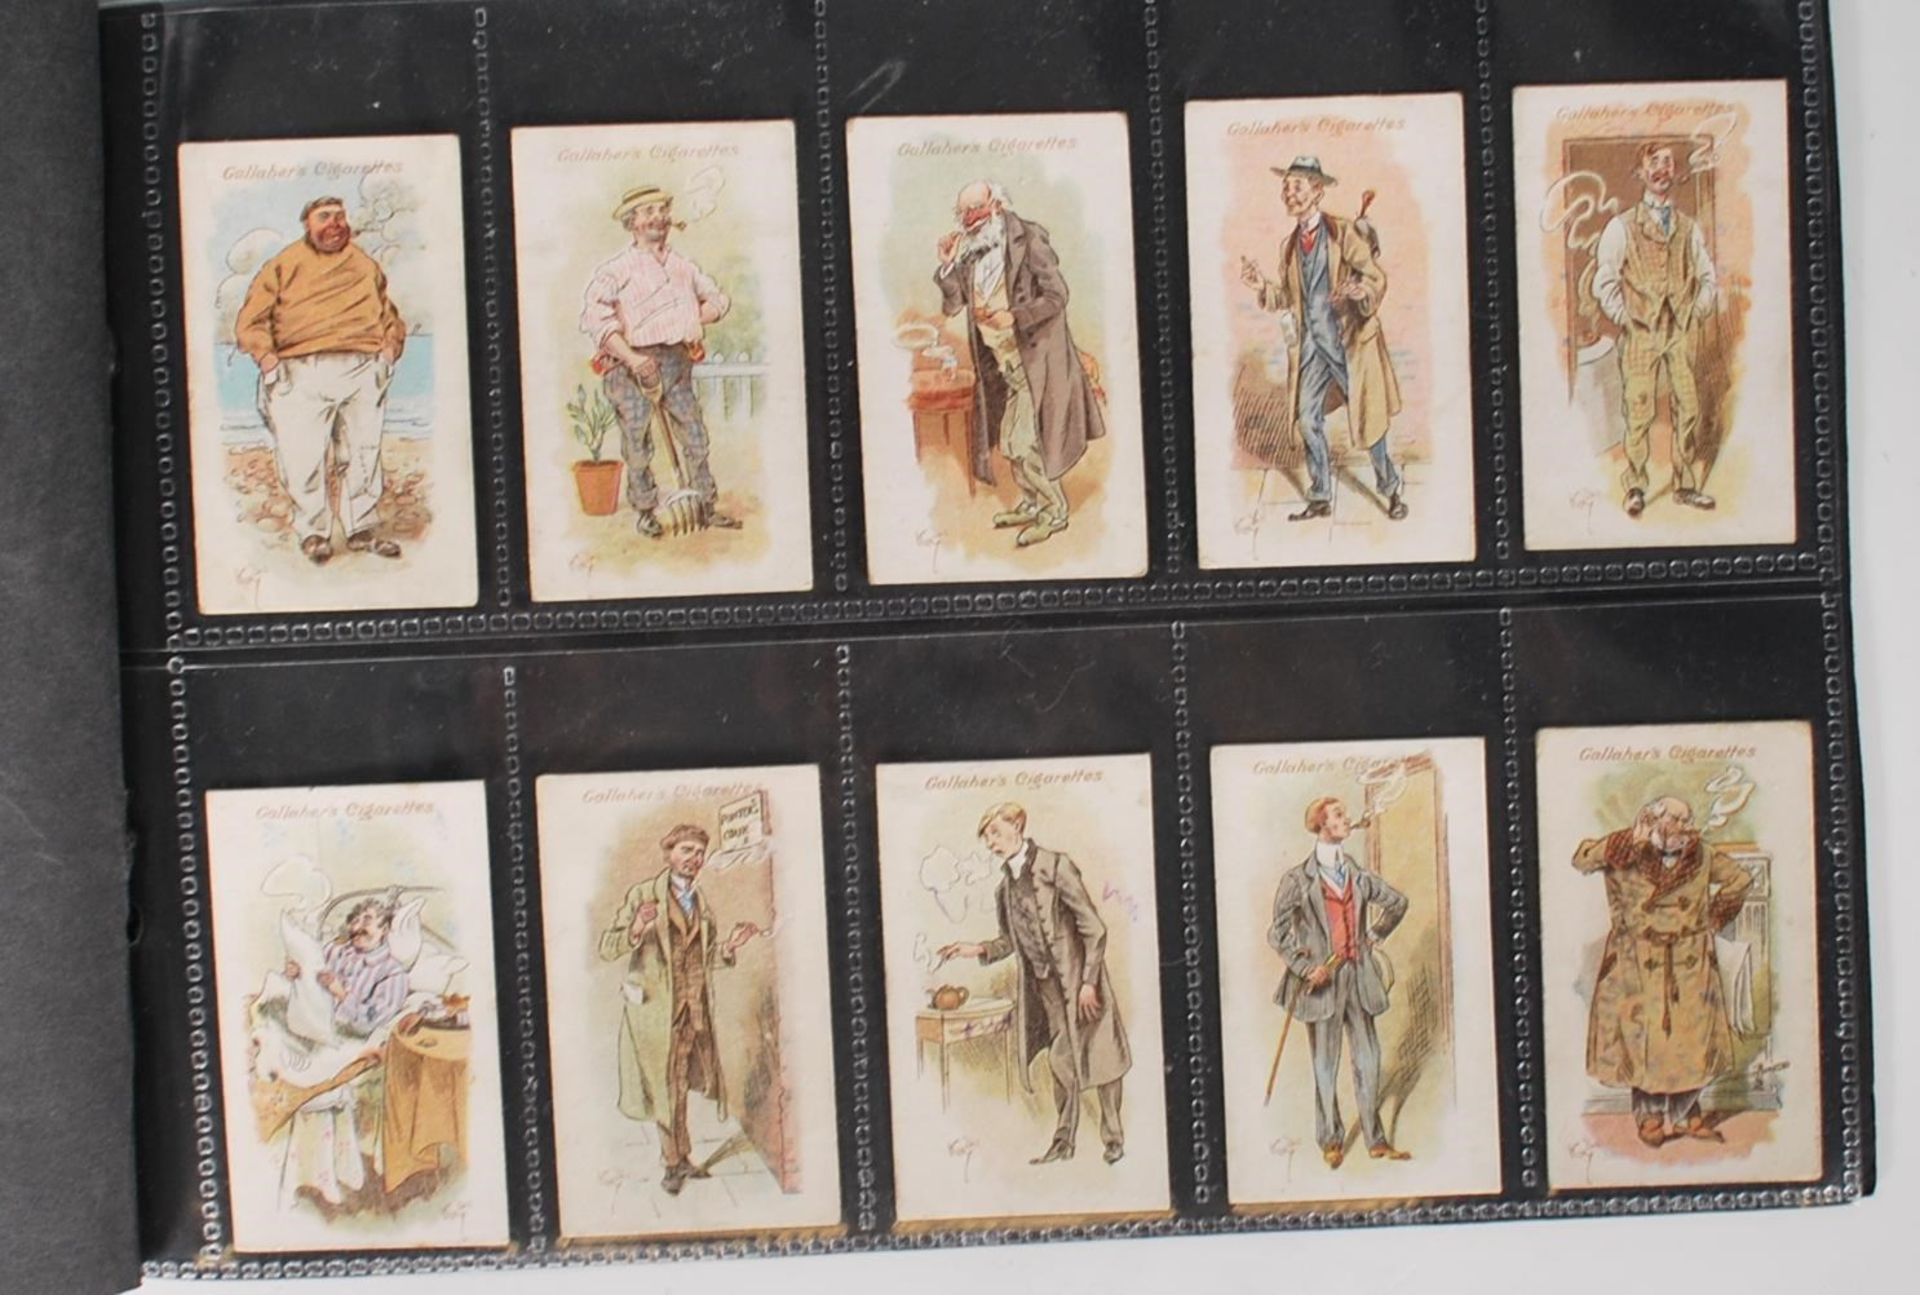 A full set of vintage Gallaher Cigarette trade cards, Votaries Of The Weed Series, complete set of - Image 3 of 5